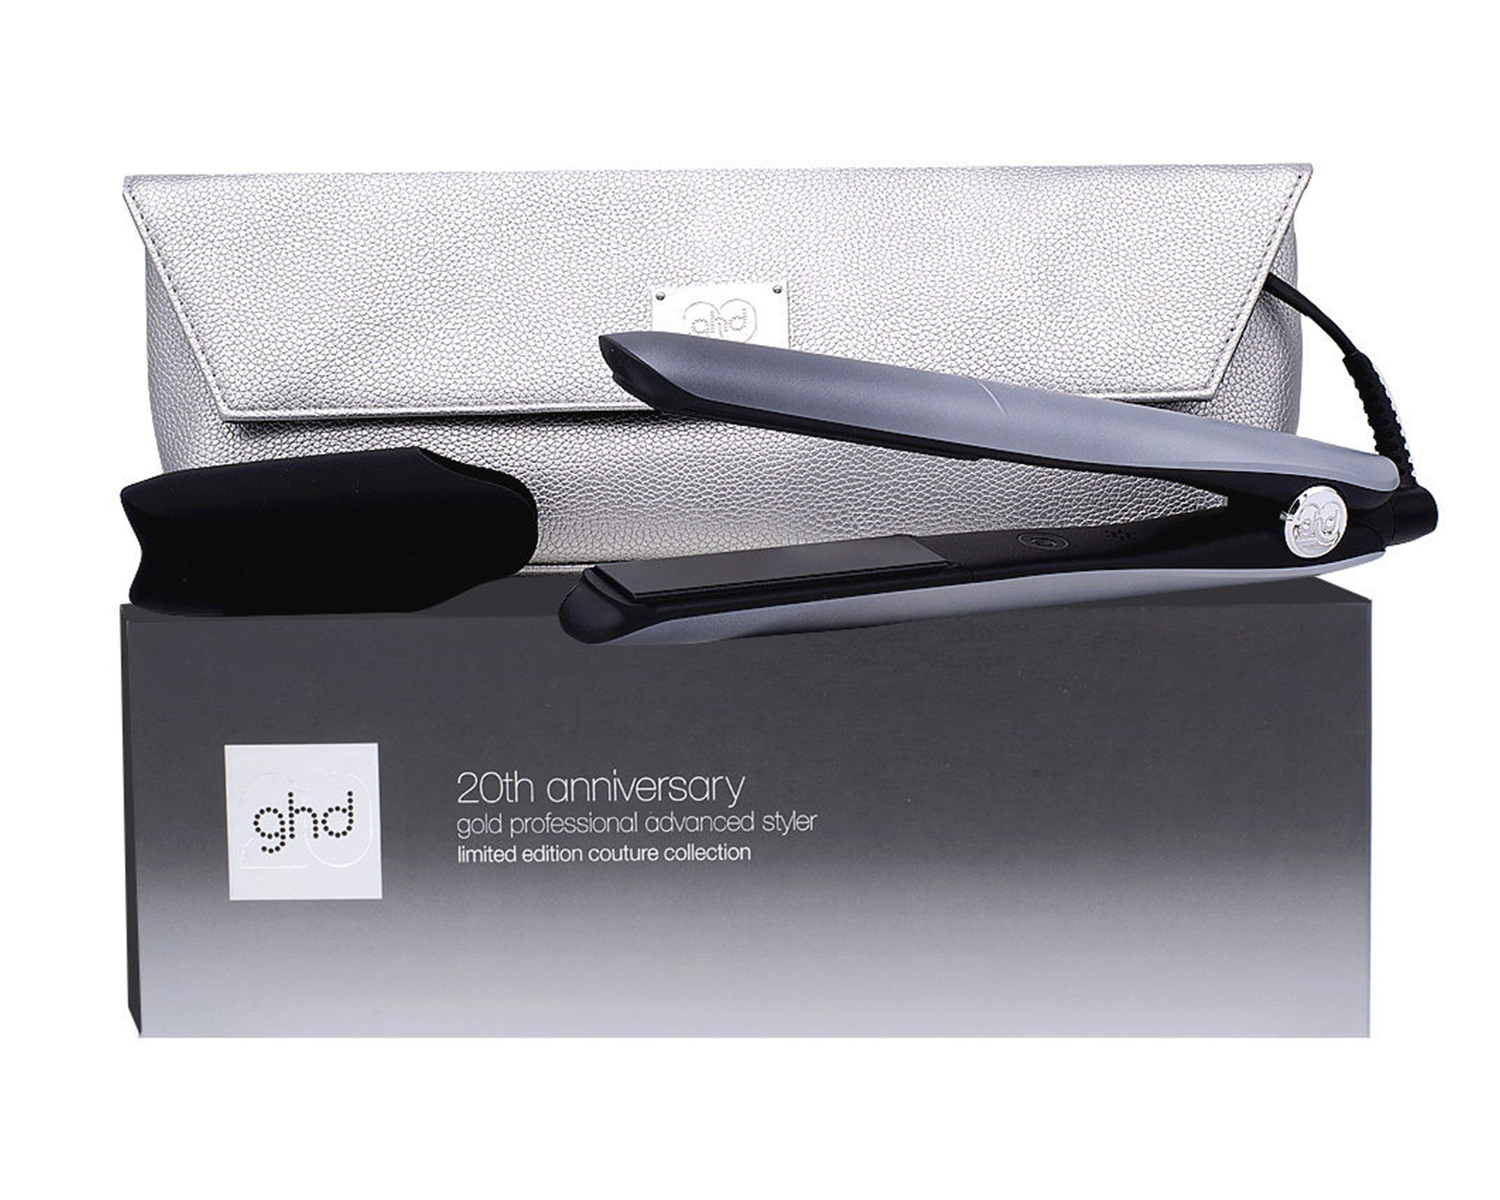 new-ghd-gold-ombr-cromato-limited-edition-2oth_-2